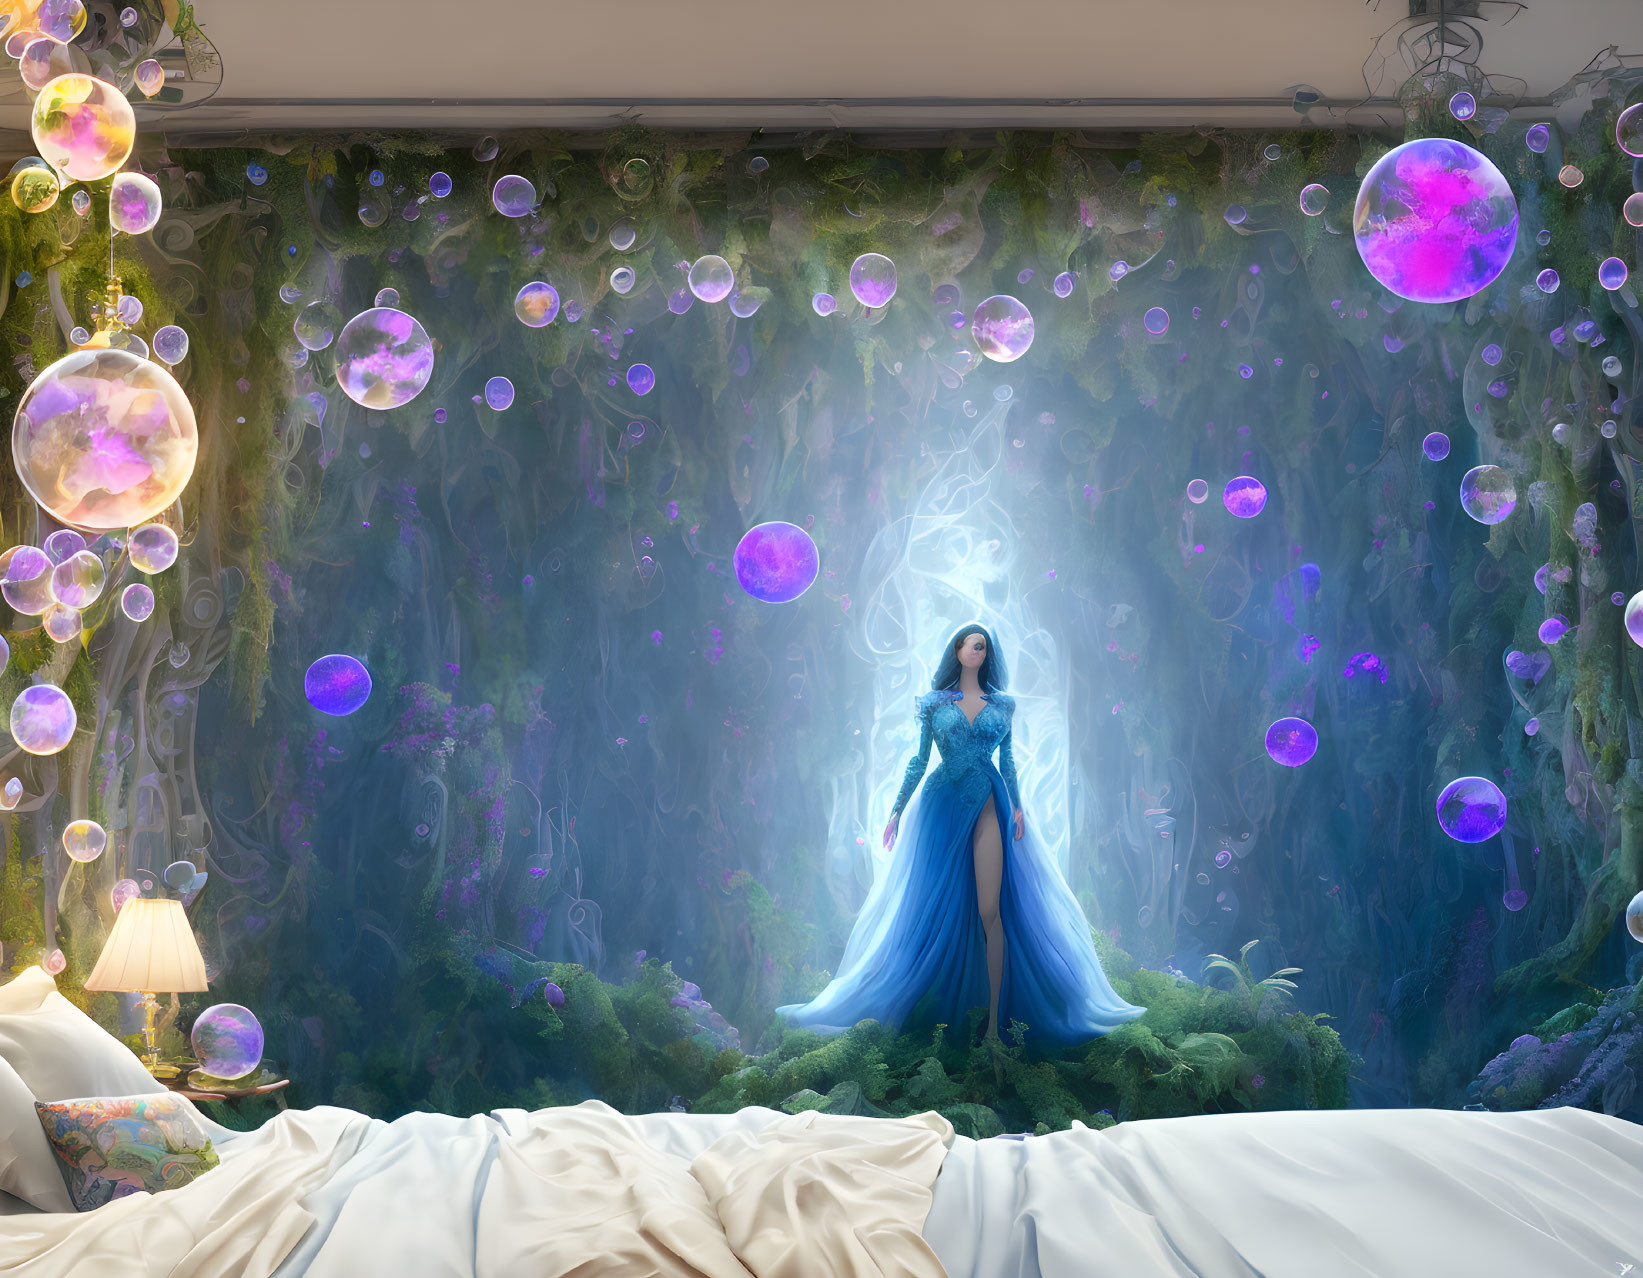 Blue-dressed figure in mystical indoor forest with purple orbs and bubbles